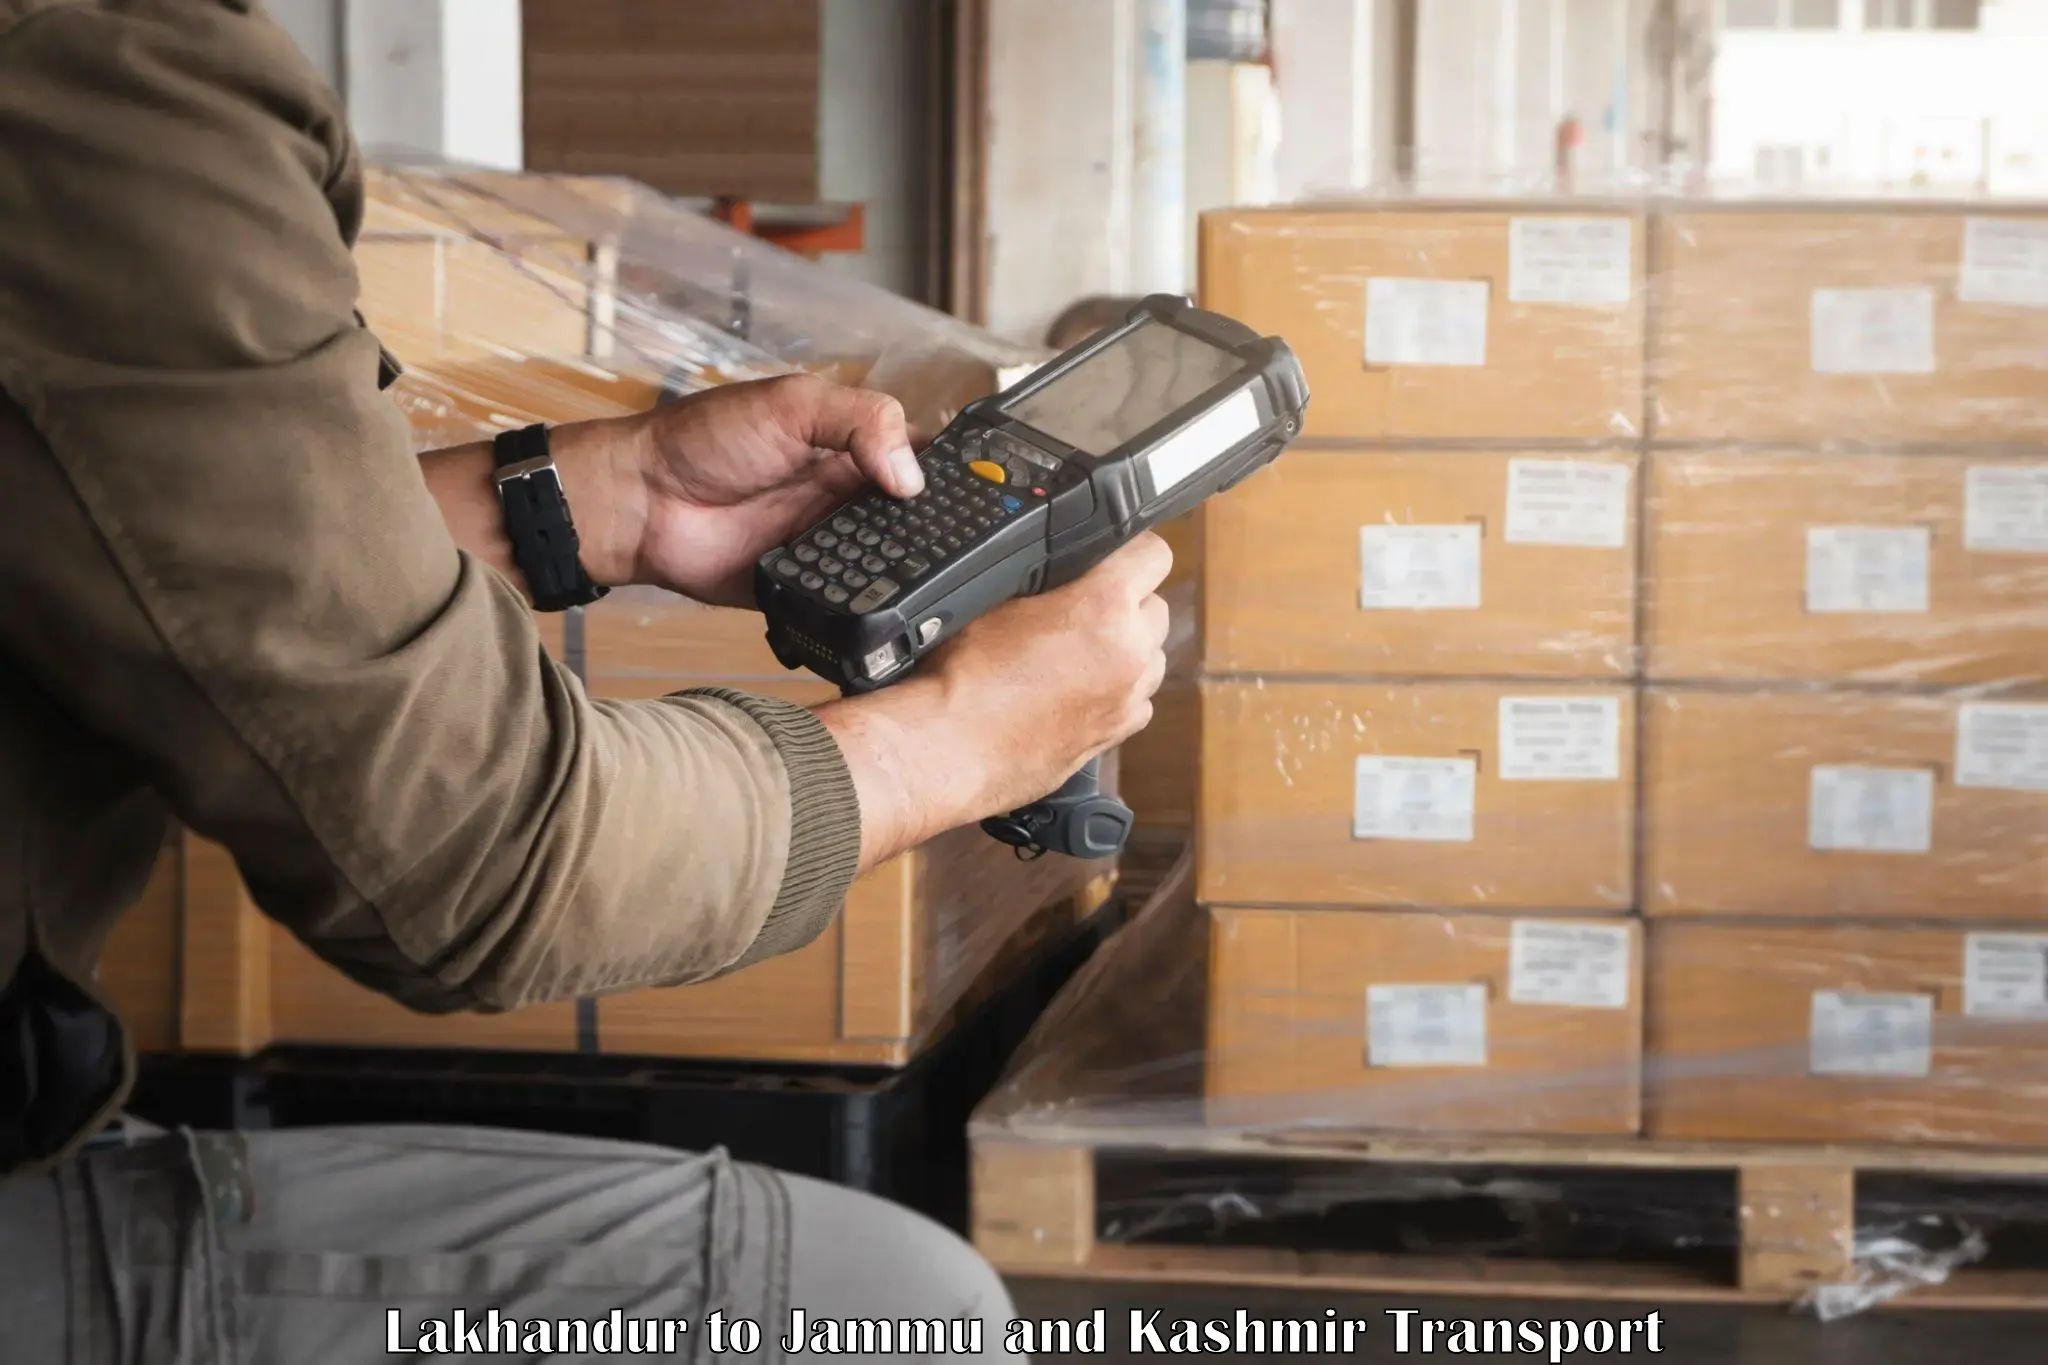 Commercial transport service Lakhandur to Jammu and Kashmir